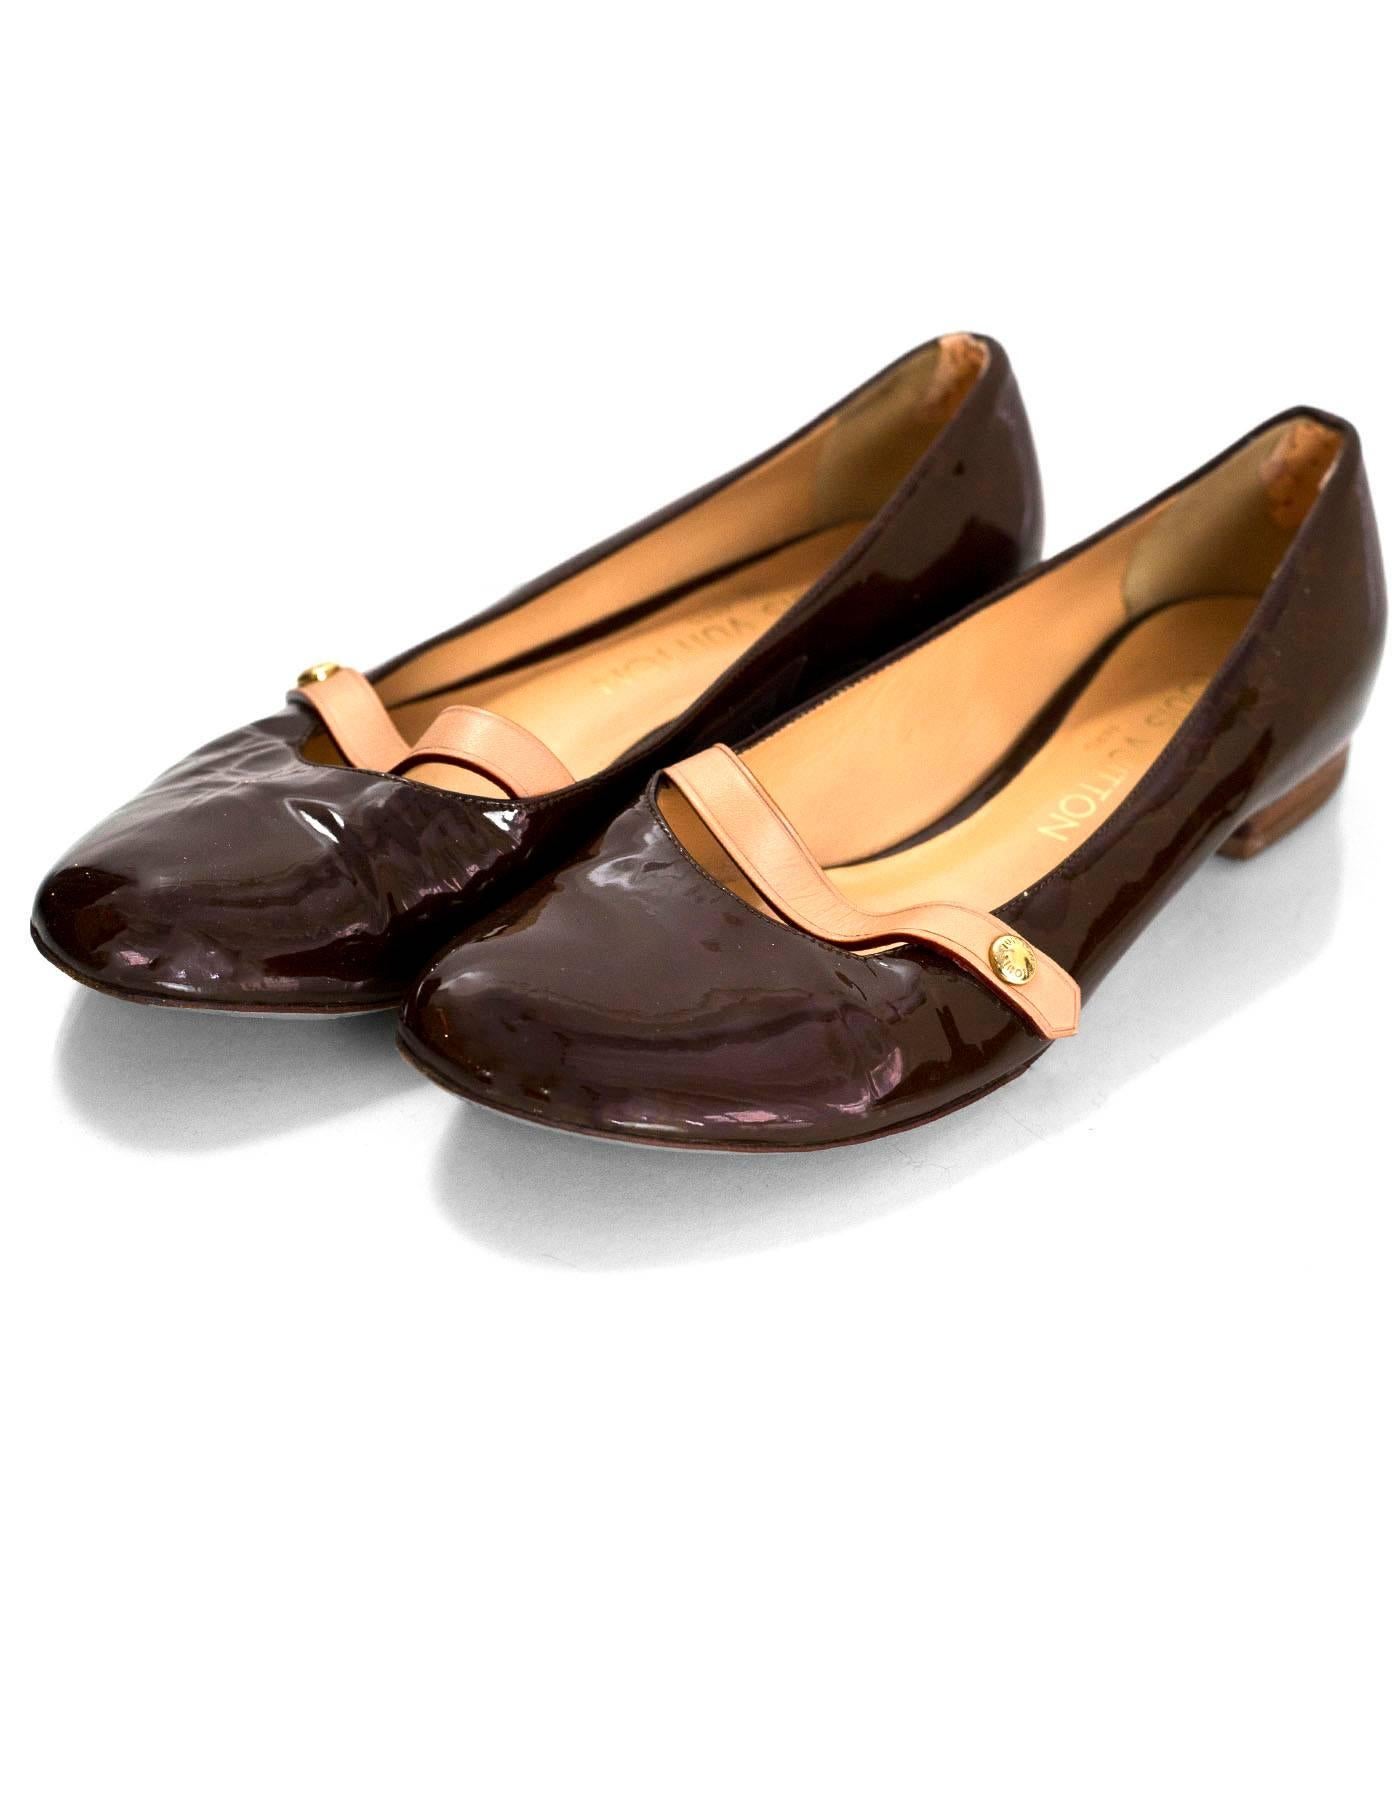 Louis Vuitton Brown Patent Leather Logo Flats Sz 35.5
Features vachetta strap across vamp and ombre logo at heels

Made In: Italy
Color: Brown
Closure/Opening: Slide on
Sole Stamp: LV 35.5 Made in Italy
Overall Condition: Excellent pre-owned